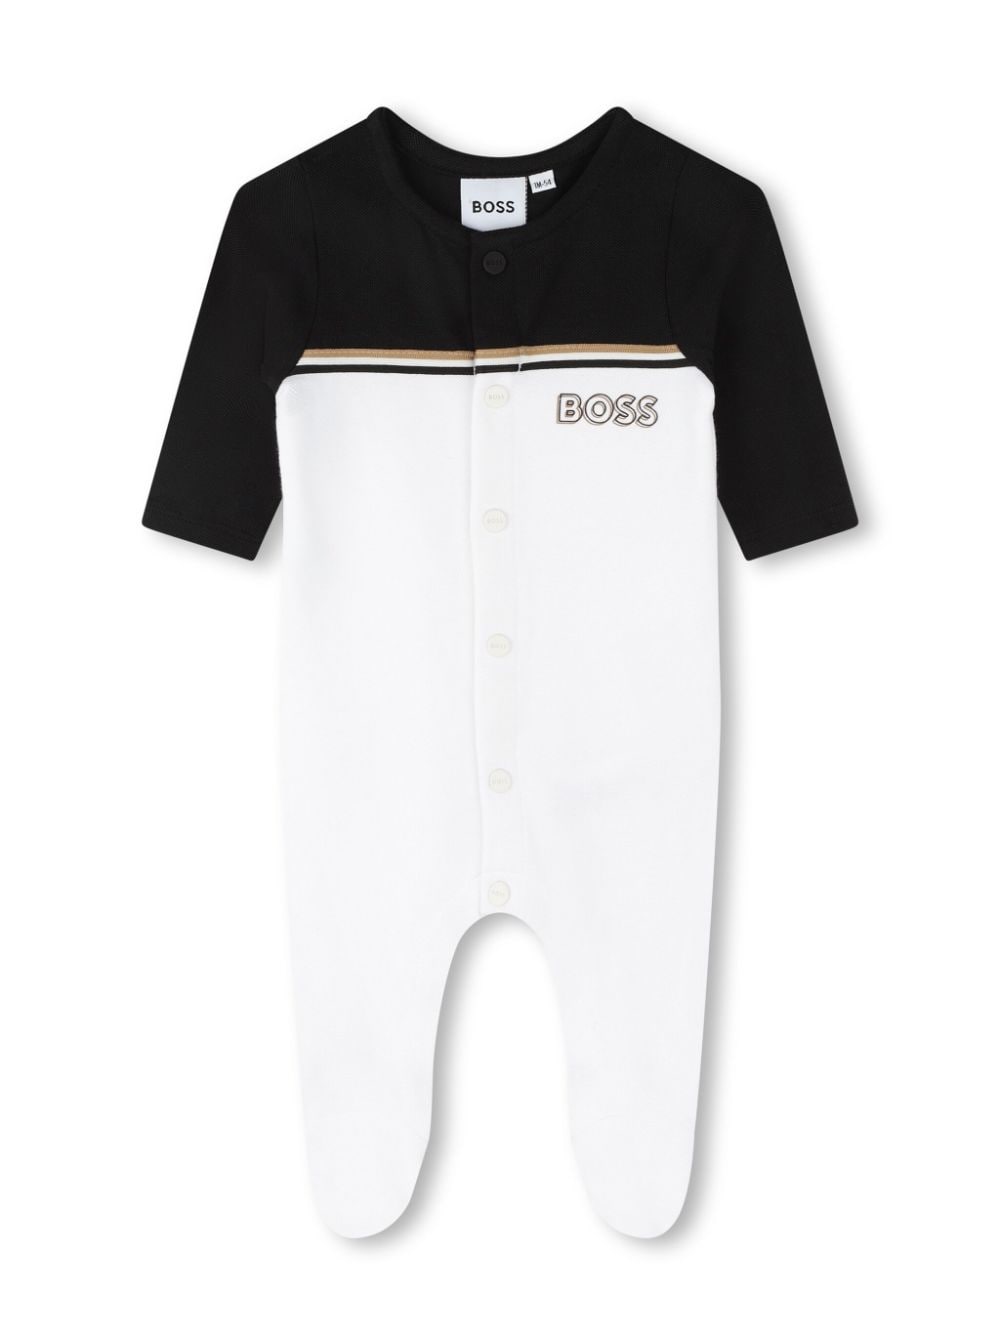 White and black onesie for newborns with logo